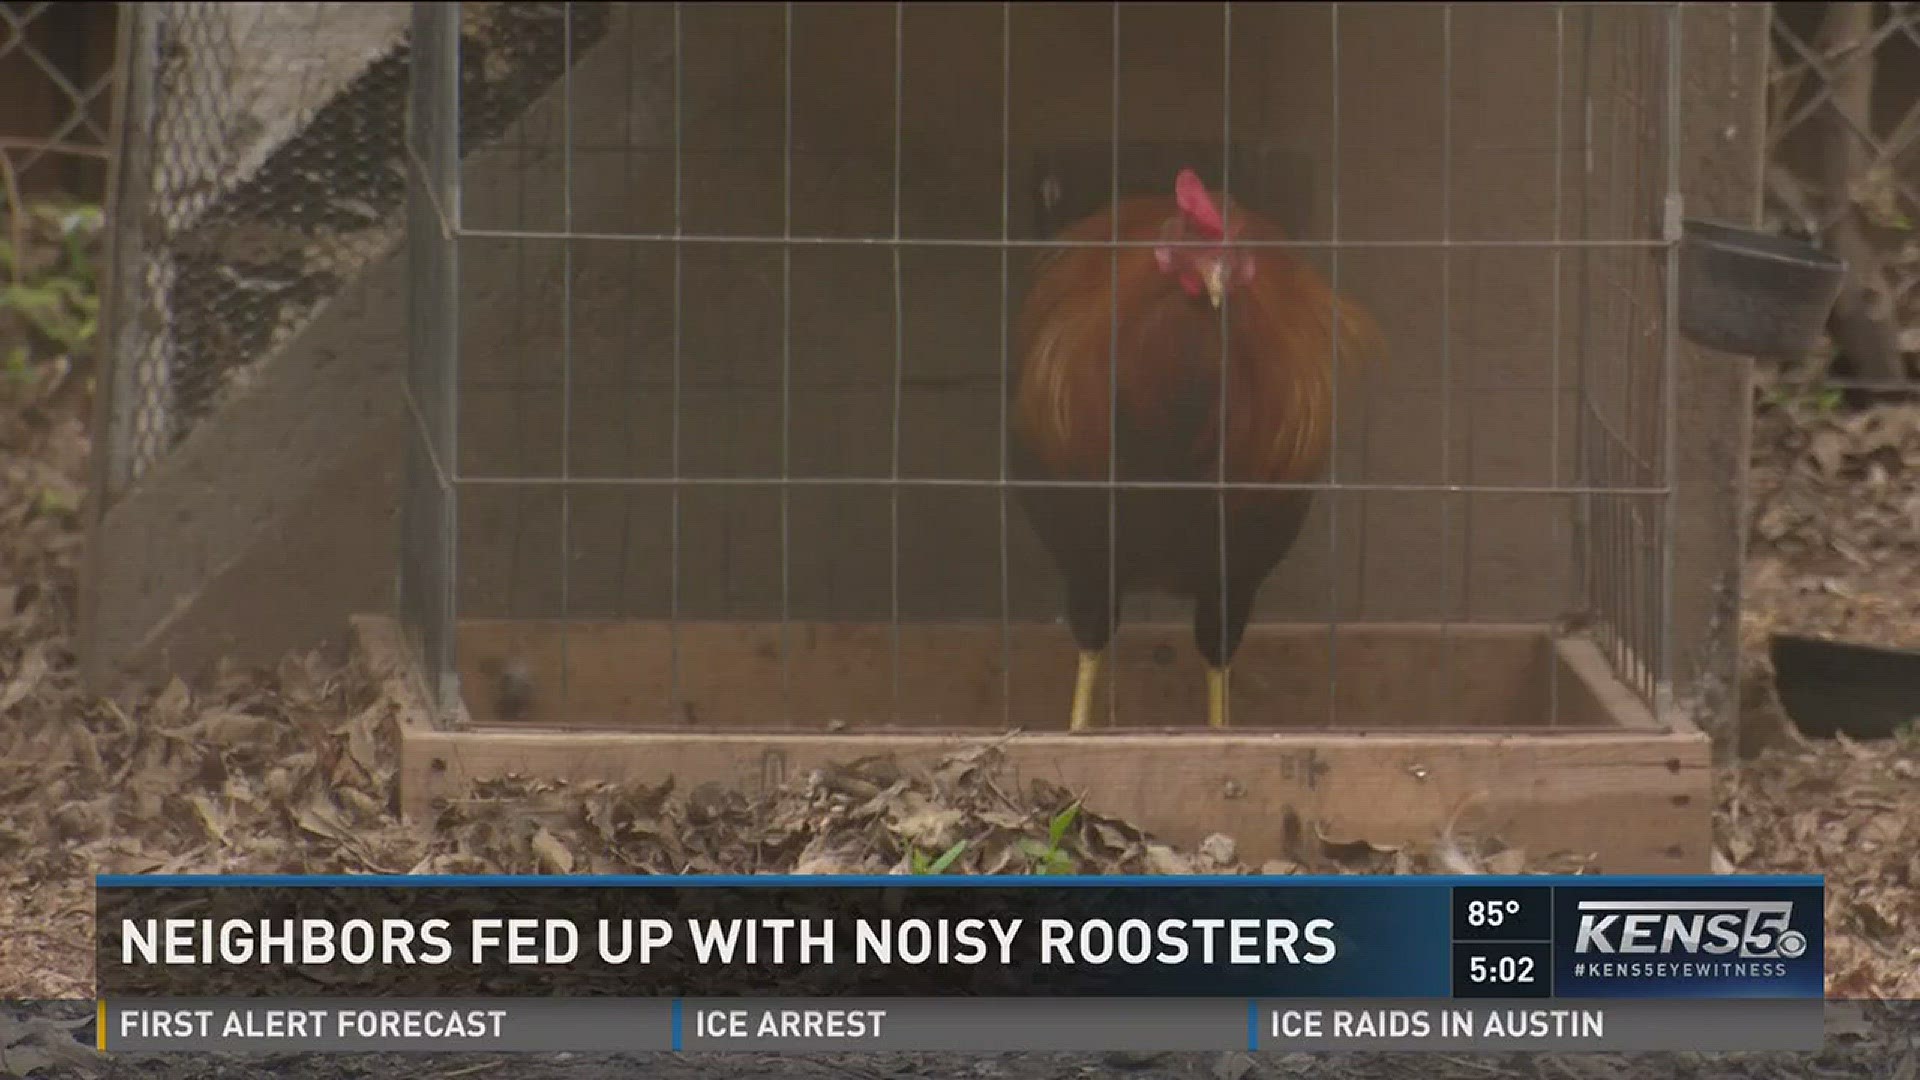 Neighbors fed up with noisy roosters